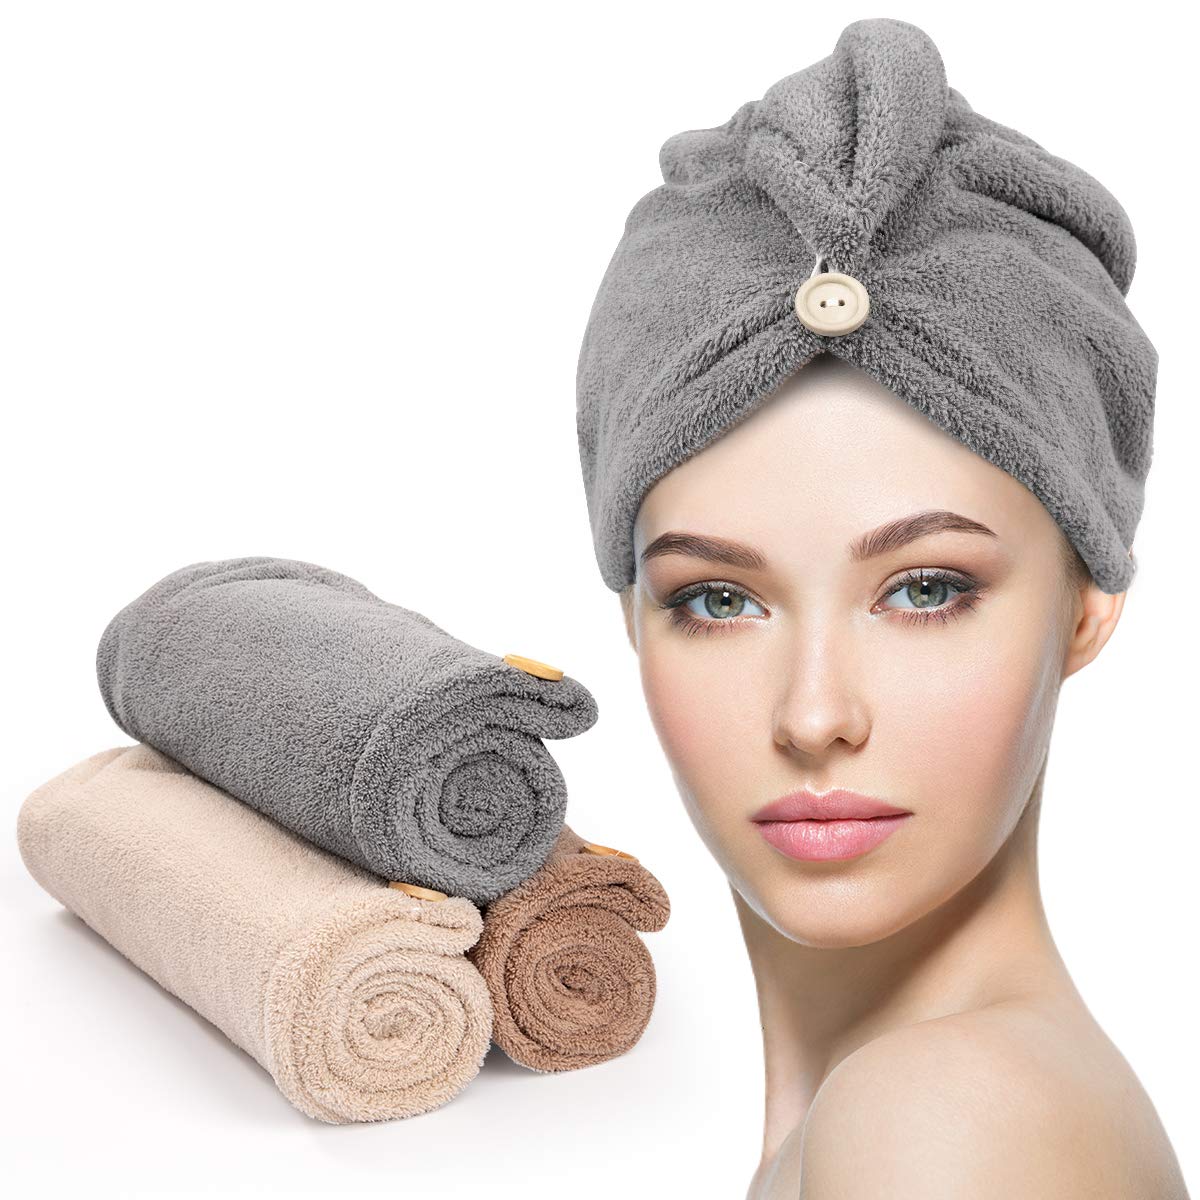 Microfiber Hair Towel 3 Pack, YFONG Hair Towel with Button, Super Absorbent  Hair Towel Wrap for Curly Hair, Fast Drying Hair Wraps for Women, Anti  Frizz Microfiber Towel Gray & Camel &